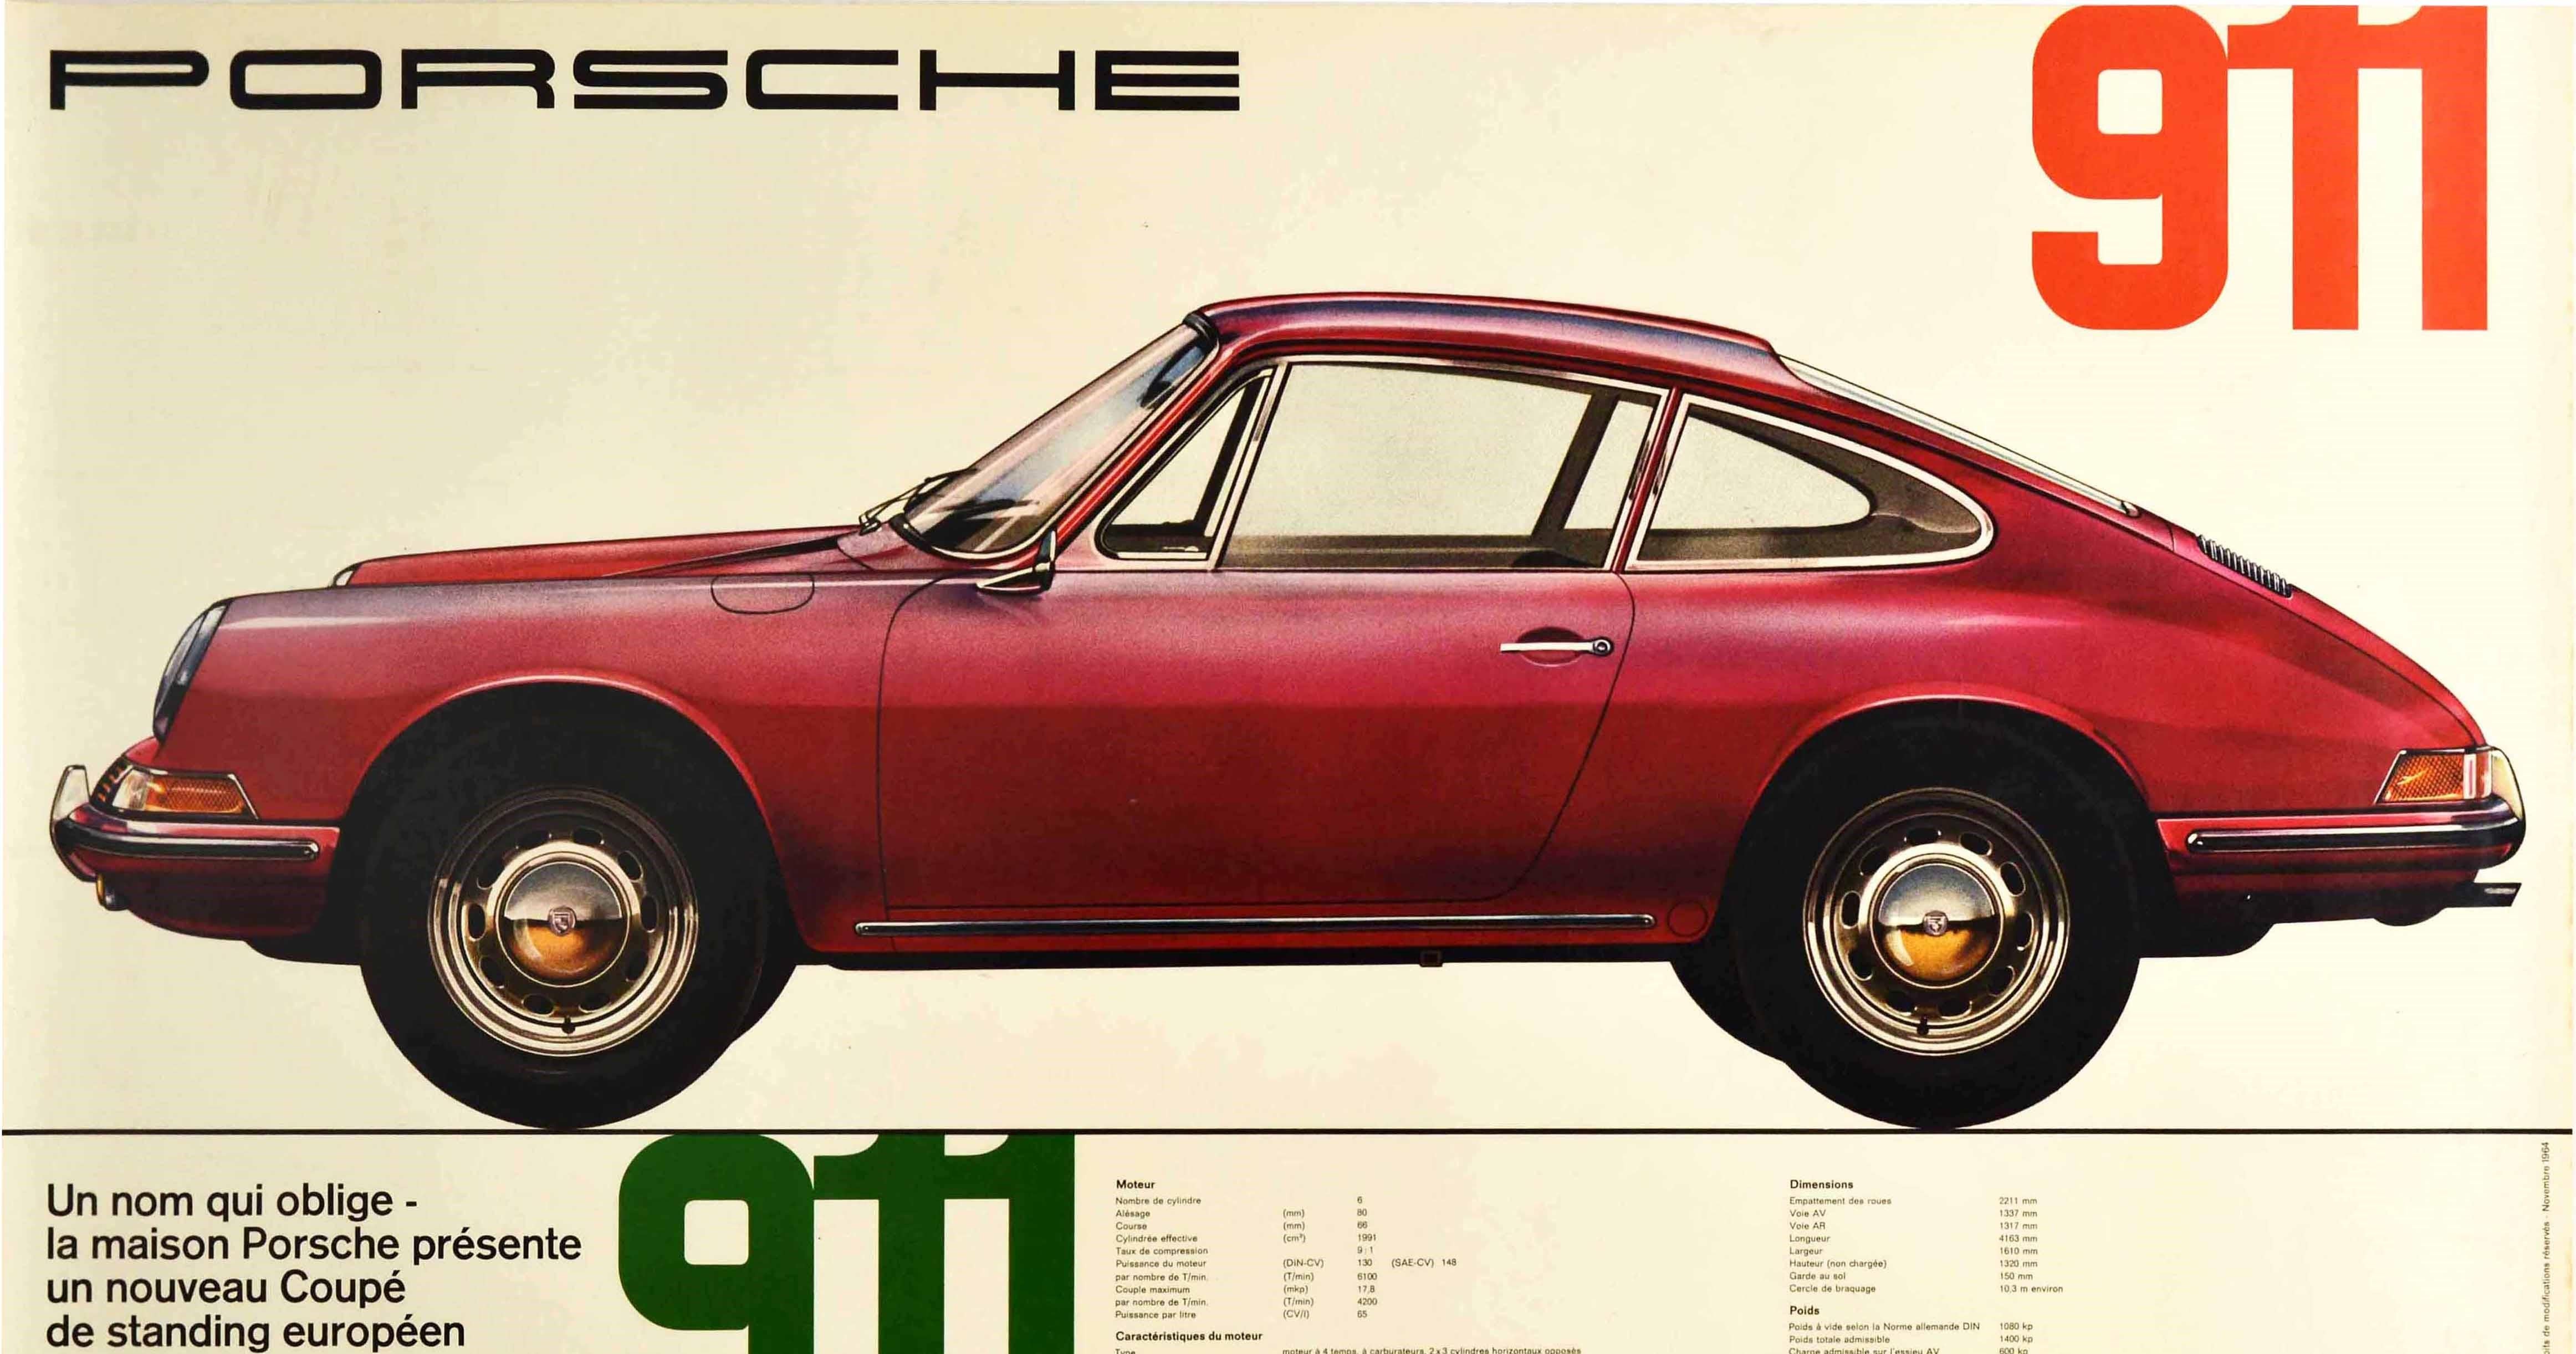 Original vintage advertising poster issued for Porsche car dealer showrooms to promote Porsche 911. The text reads: A name that obliges The Porsche house presents a new European standing Cup / Un nom qui oblige La maison Porsche presente un nouveau